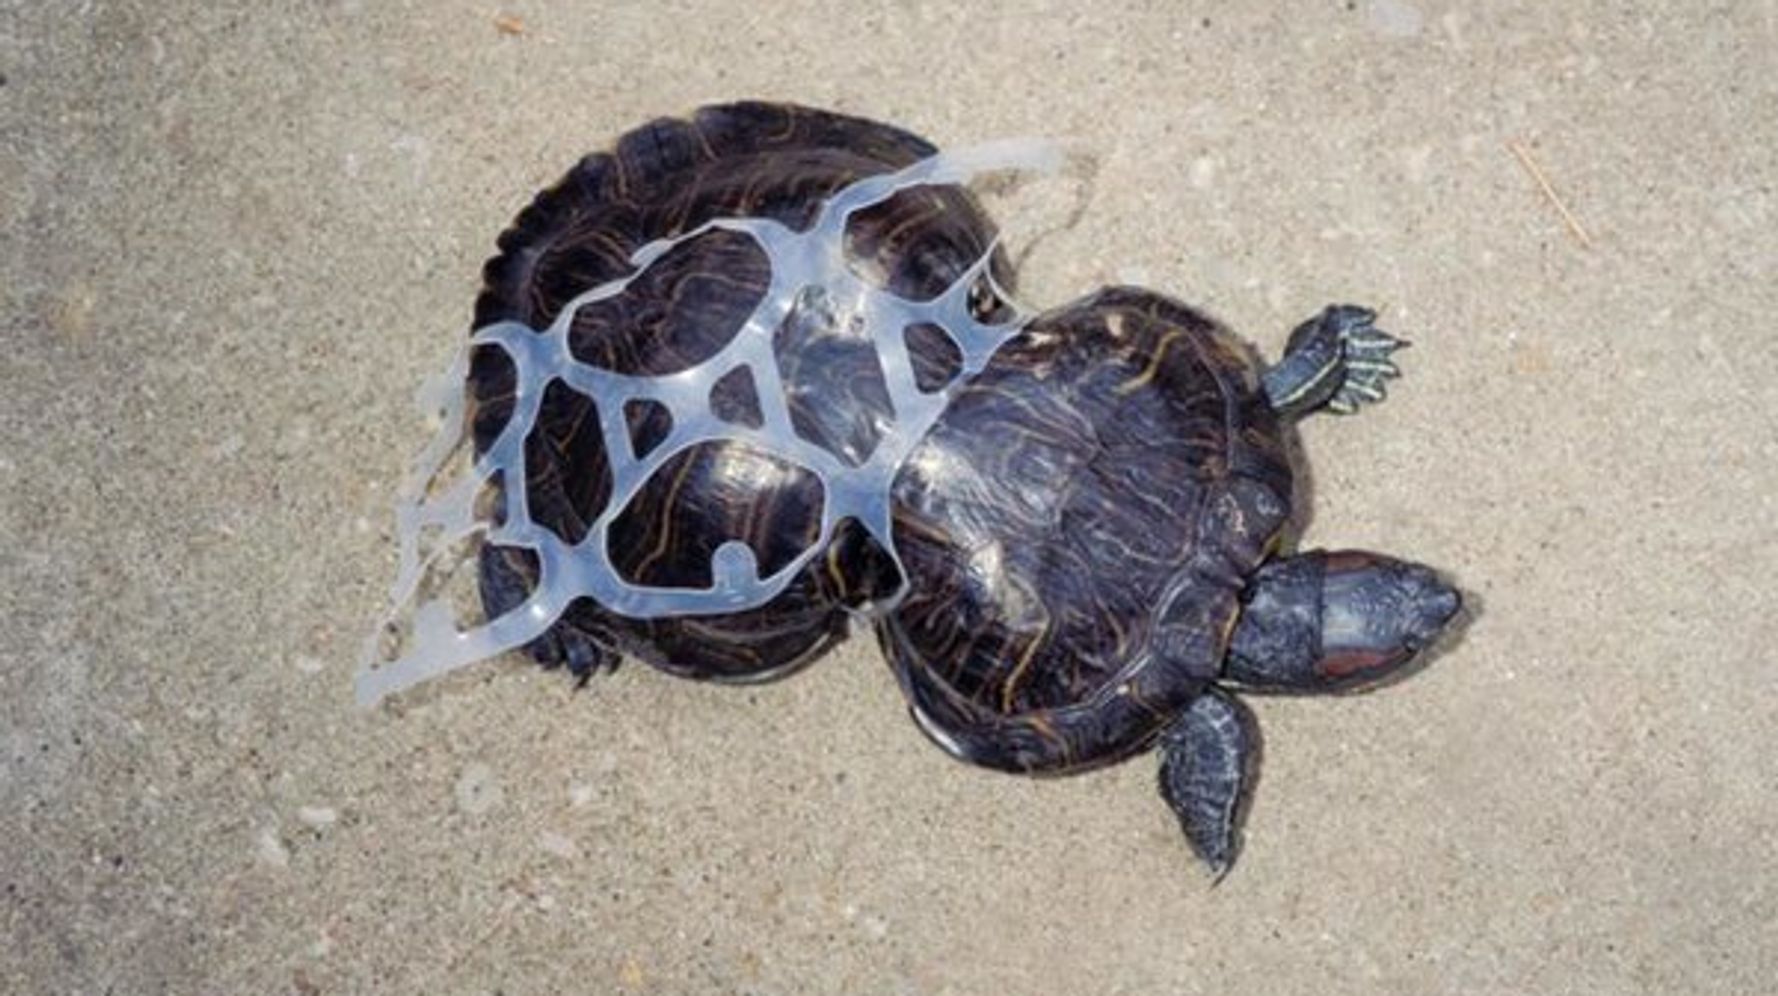 Heartbreaking Photos Show What Your Trash Does To Animals | HuffPost Impact